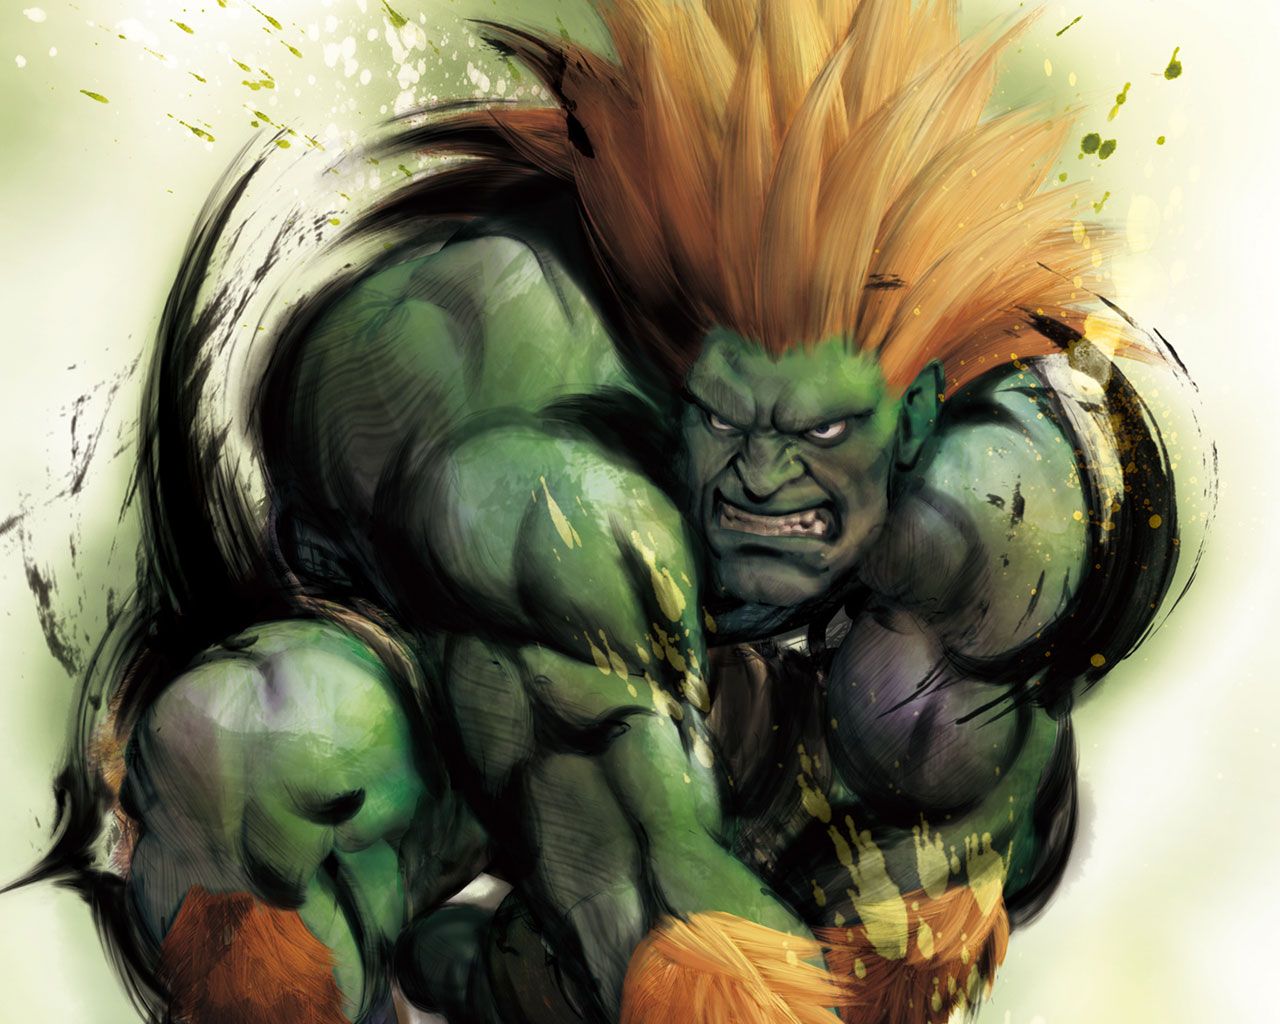 Blanka screenshots, images and pictures - Giant Bomb